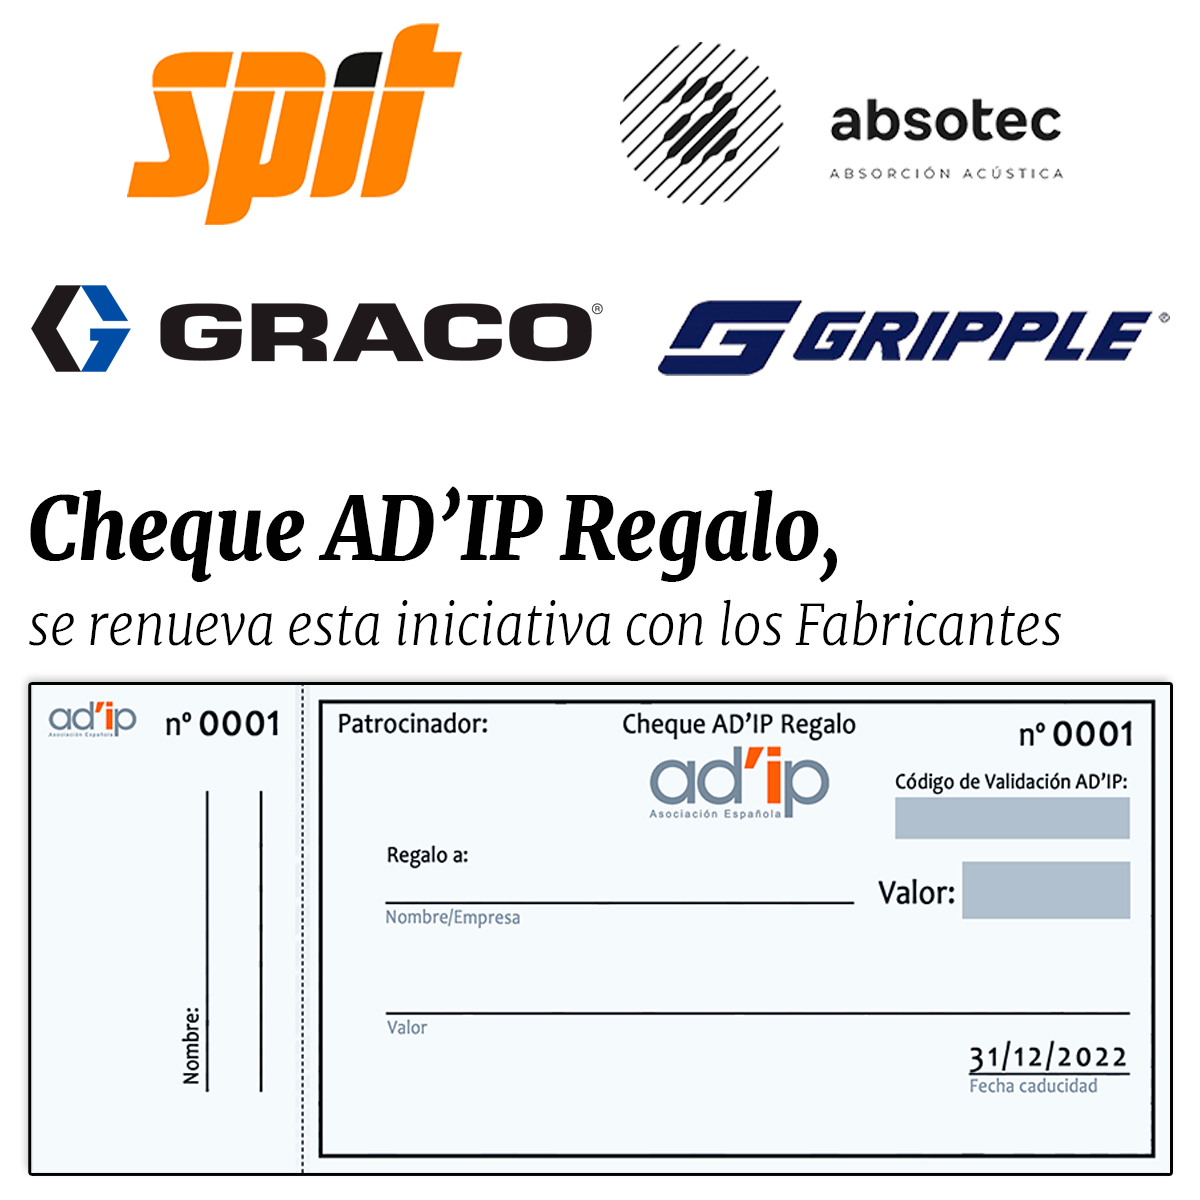 CHEQUE-AD'IP-REGALO-SPIT-GRACO-ABSOTEC-GRIPPLE